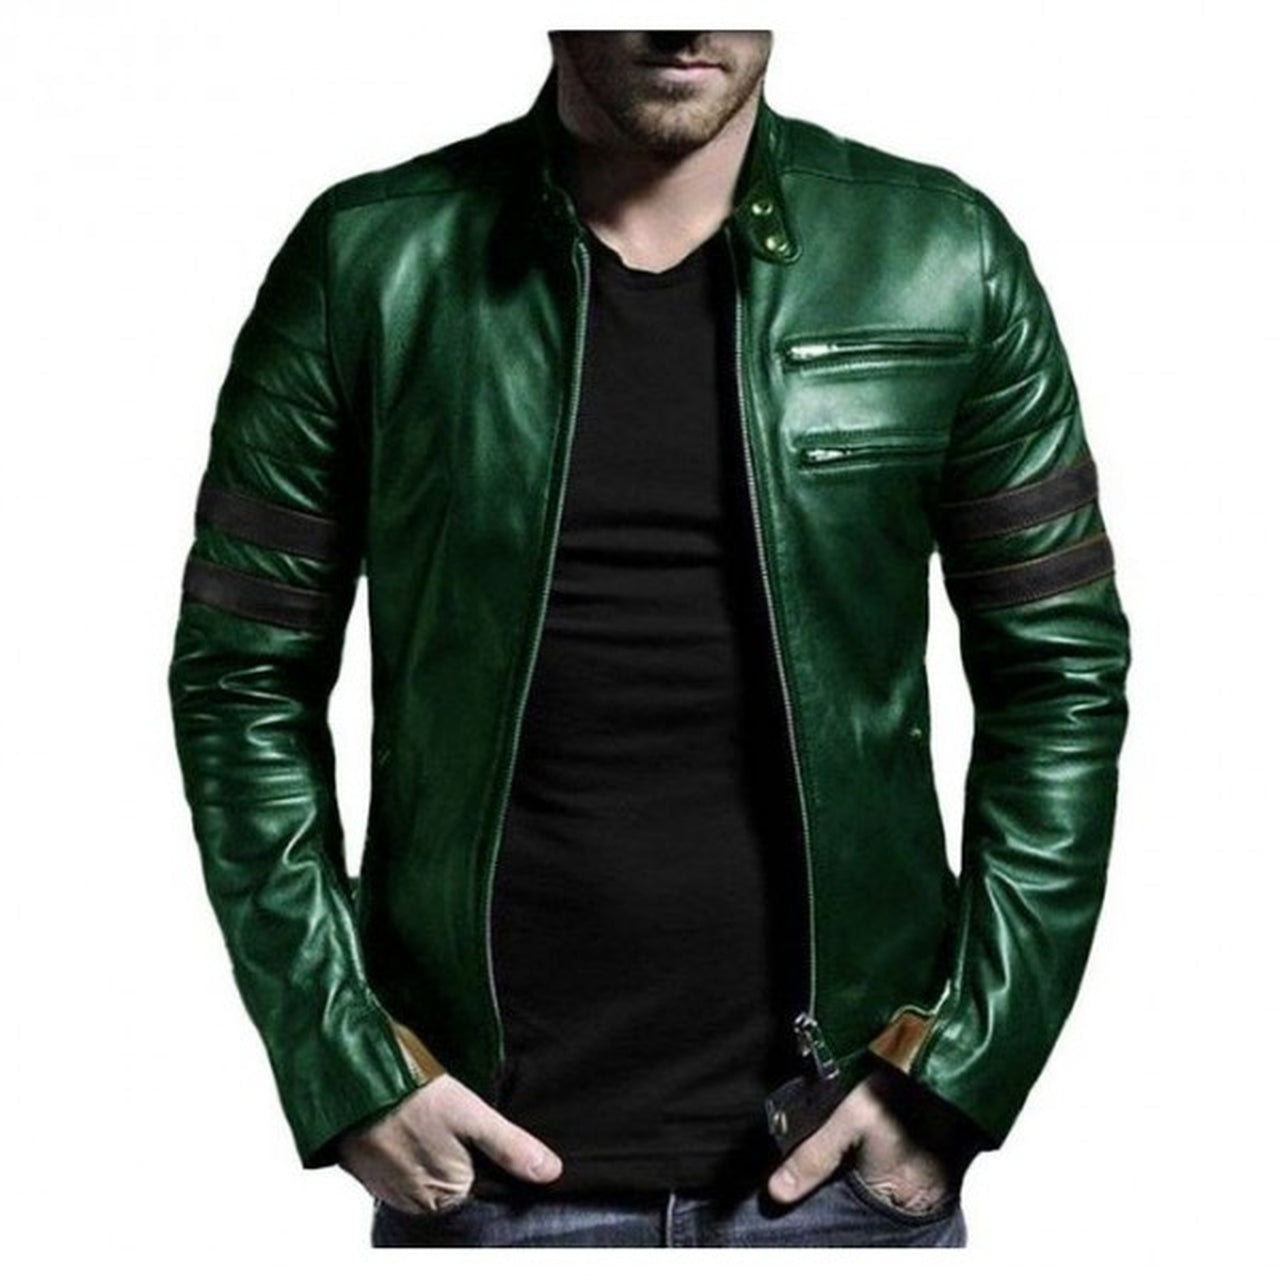 Genuine Leather Jacket For Winter In Green with Black Strip